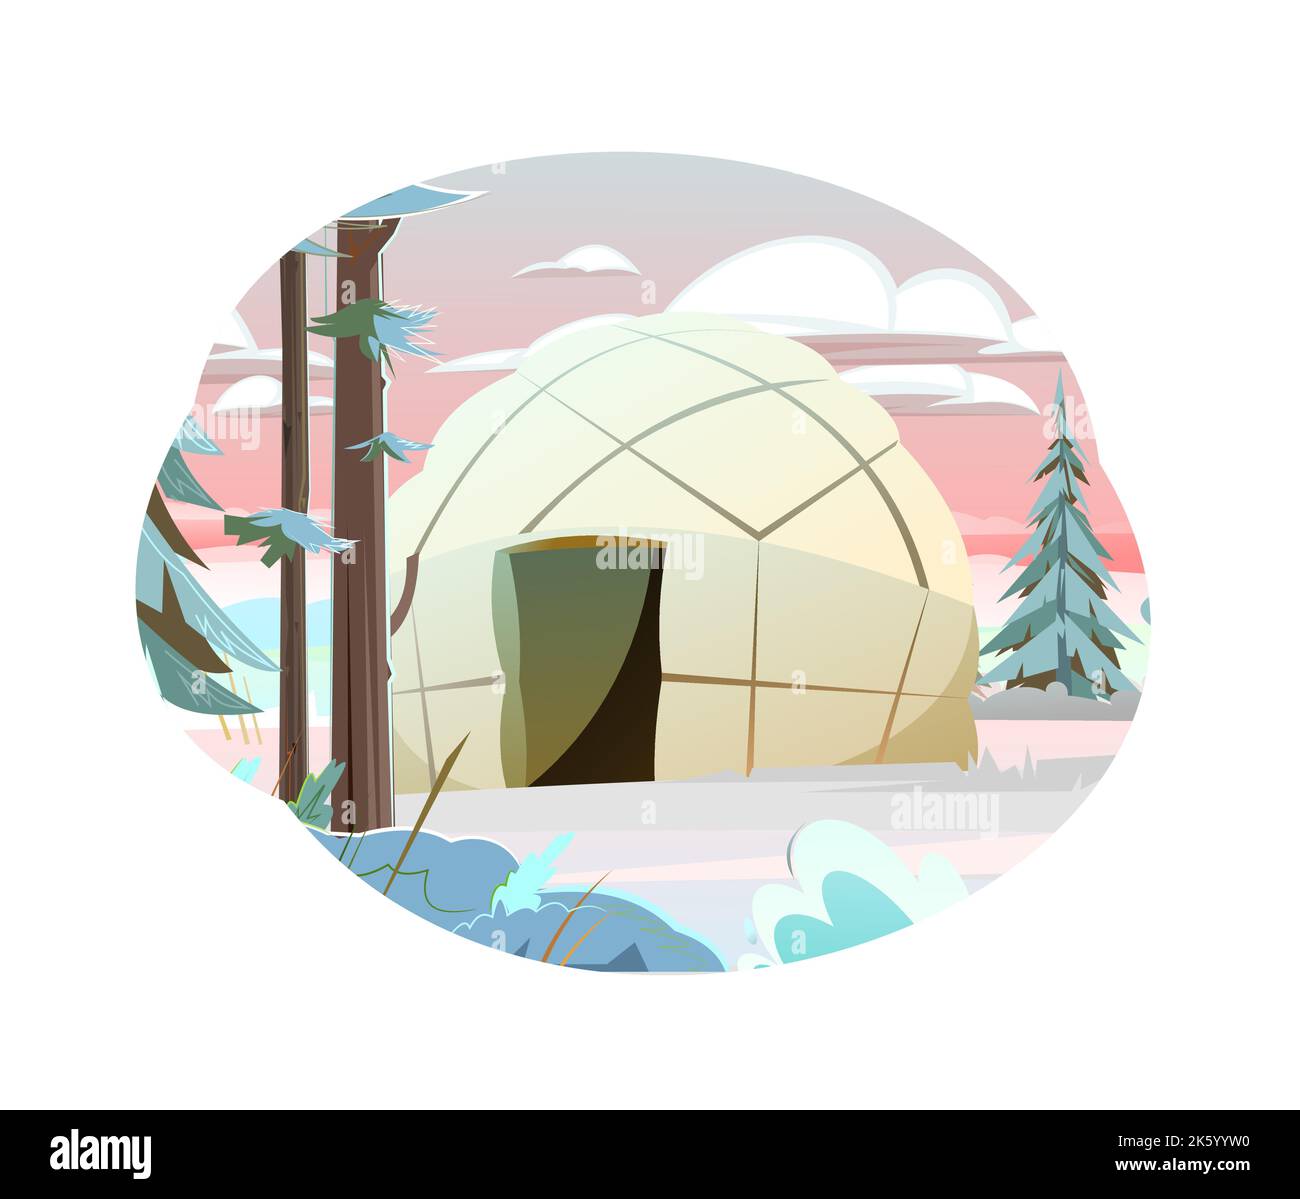 Yurt in tundra. Dwelling of northern nomadic peoples in Arctic. From felt and skins. Isolated on white background. Illustration vector. Stock Vector